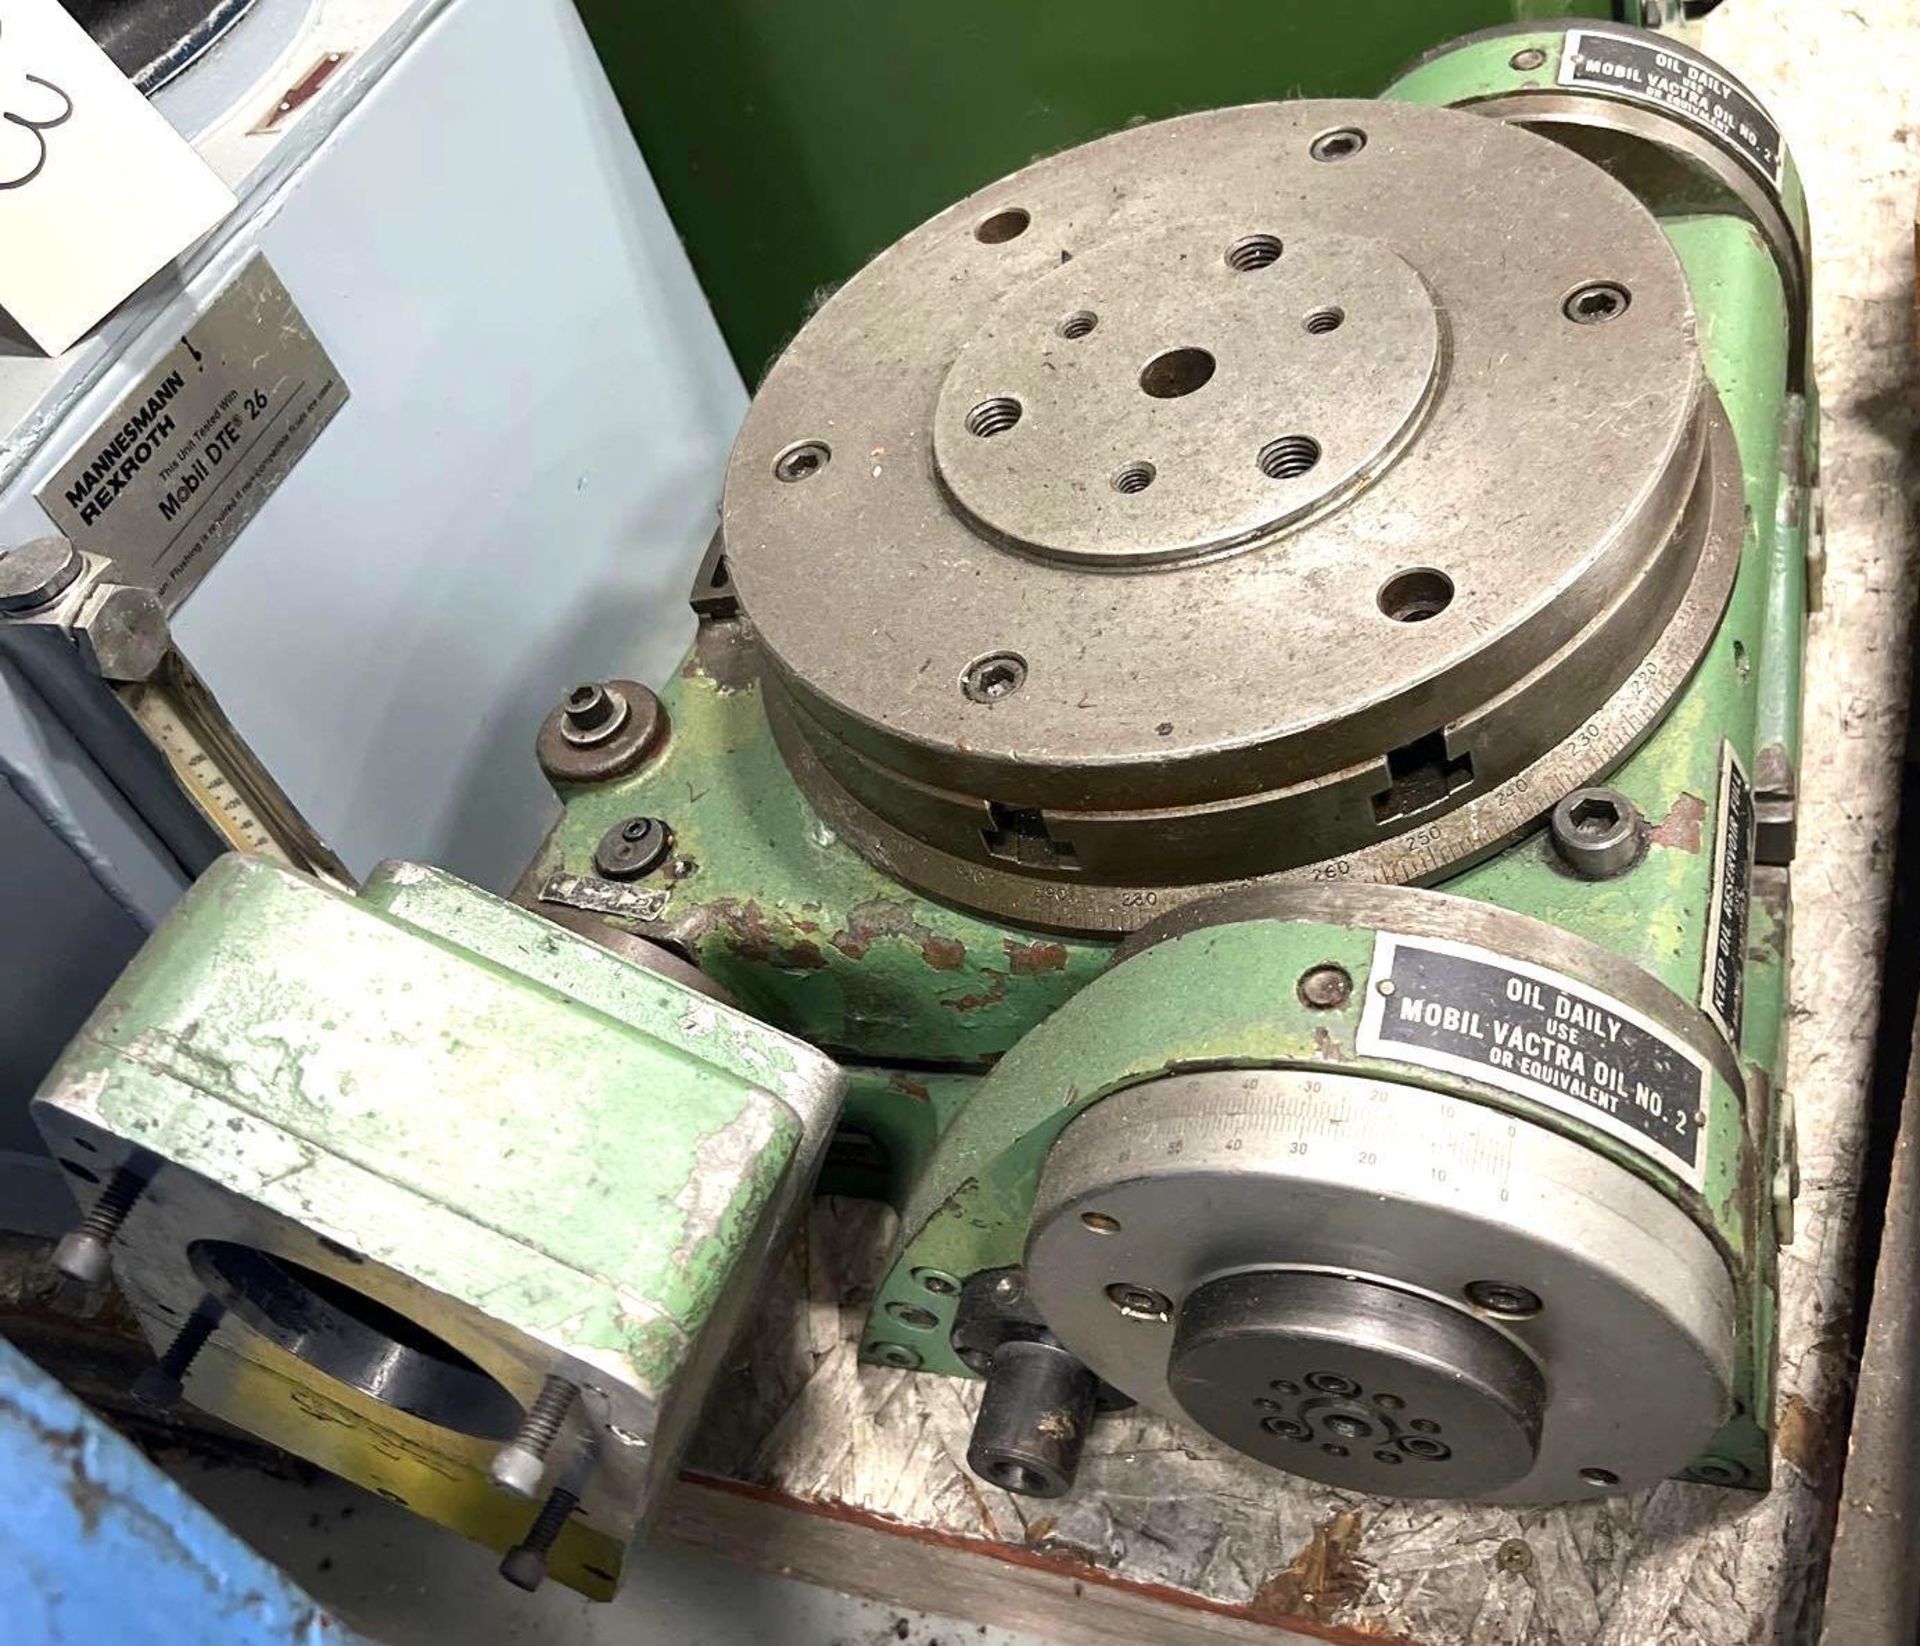 10" Walter Model #: RS 250 G Tilting Rotary Table - Image 2 of 6